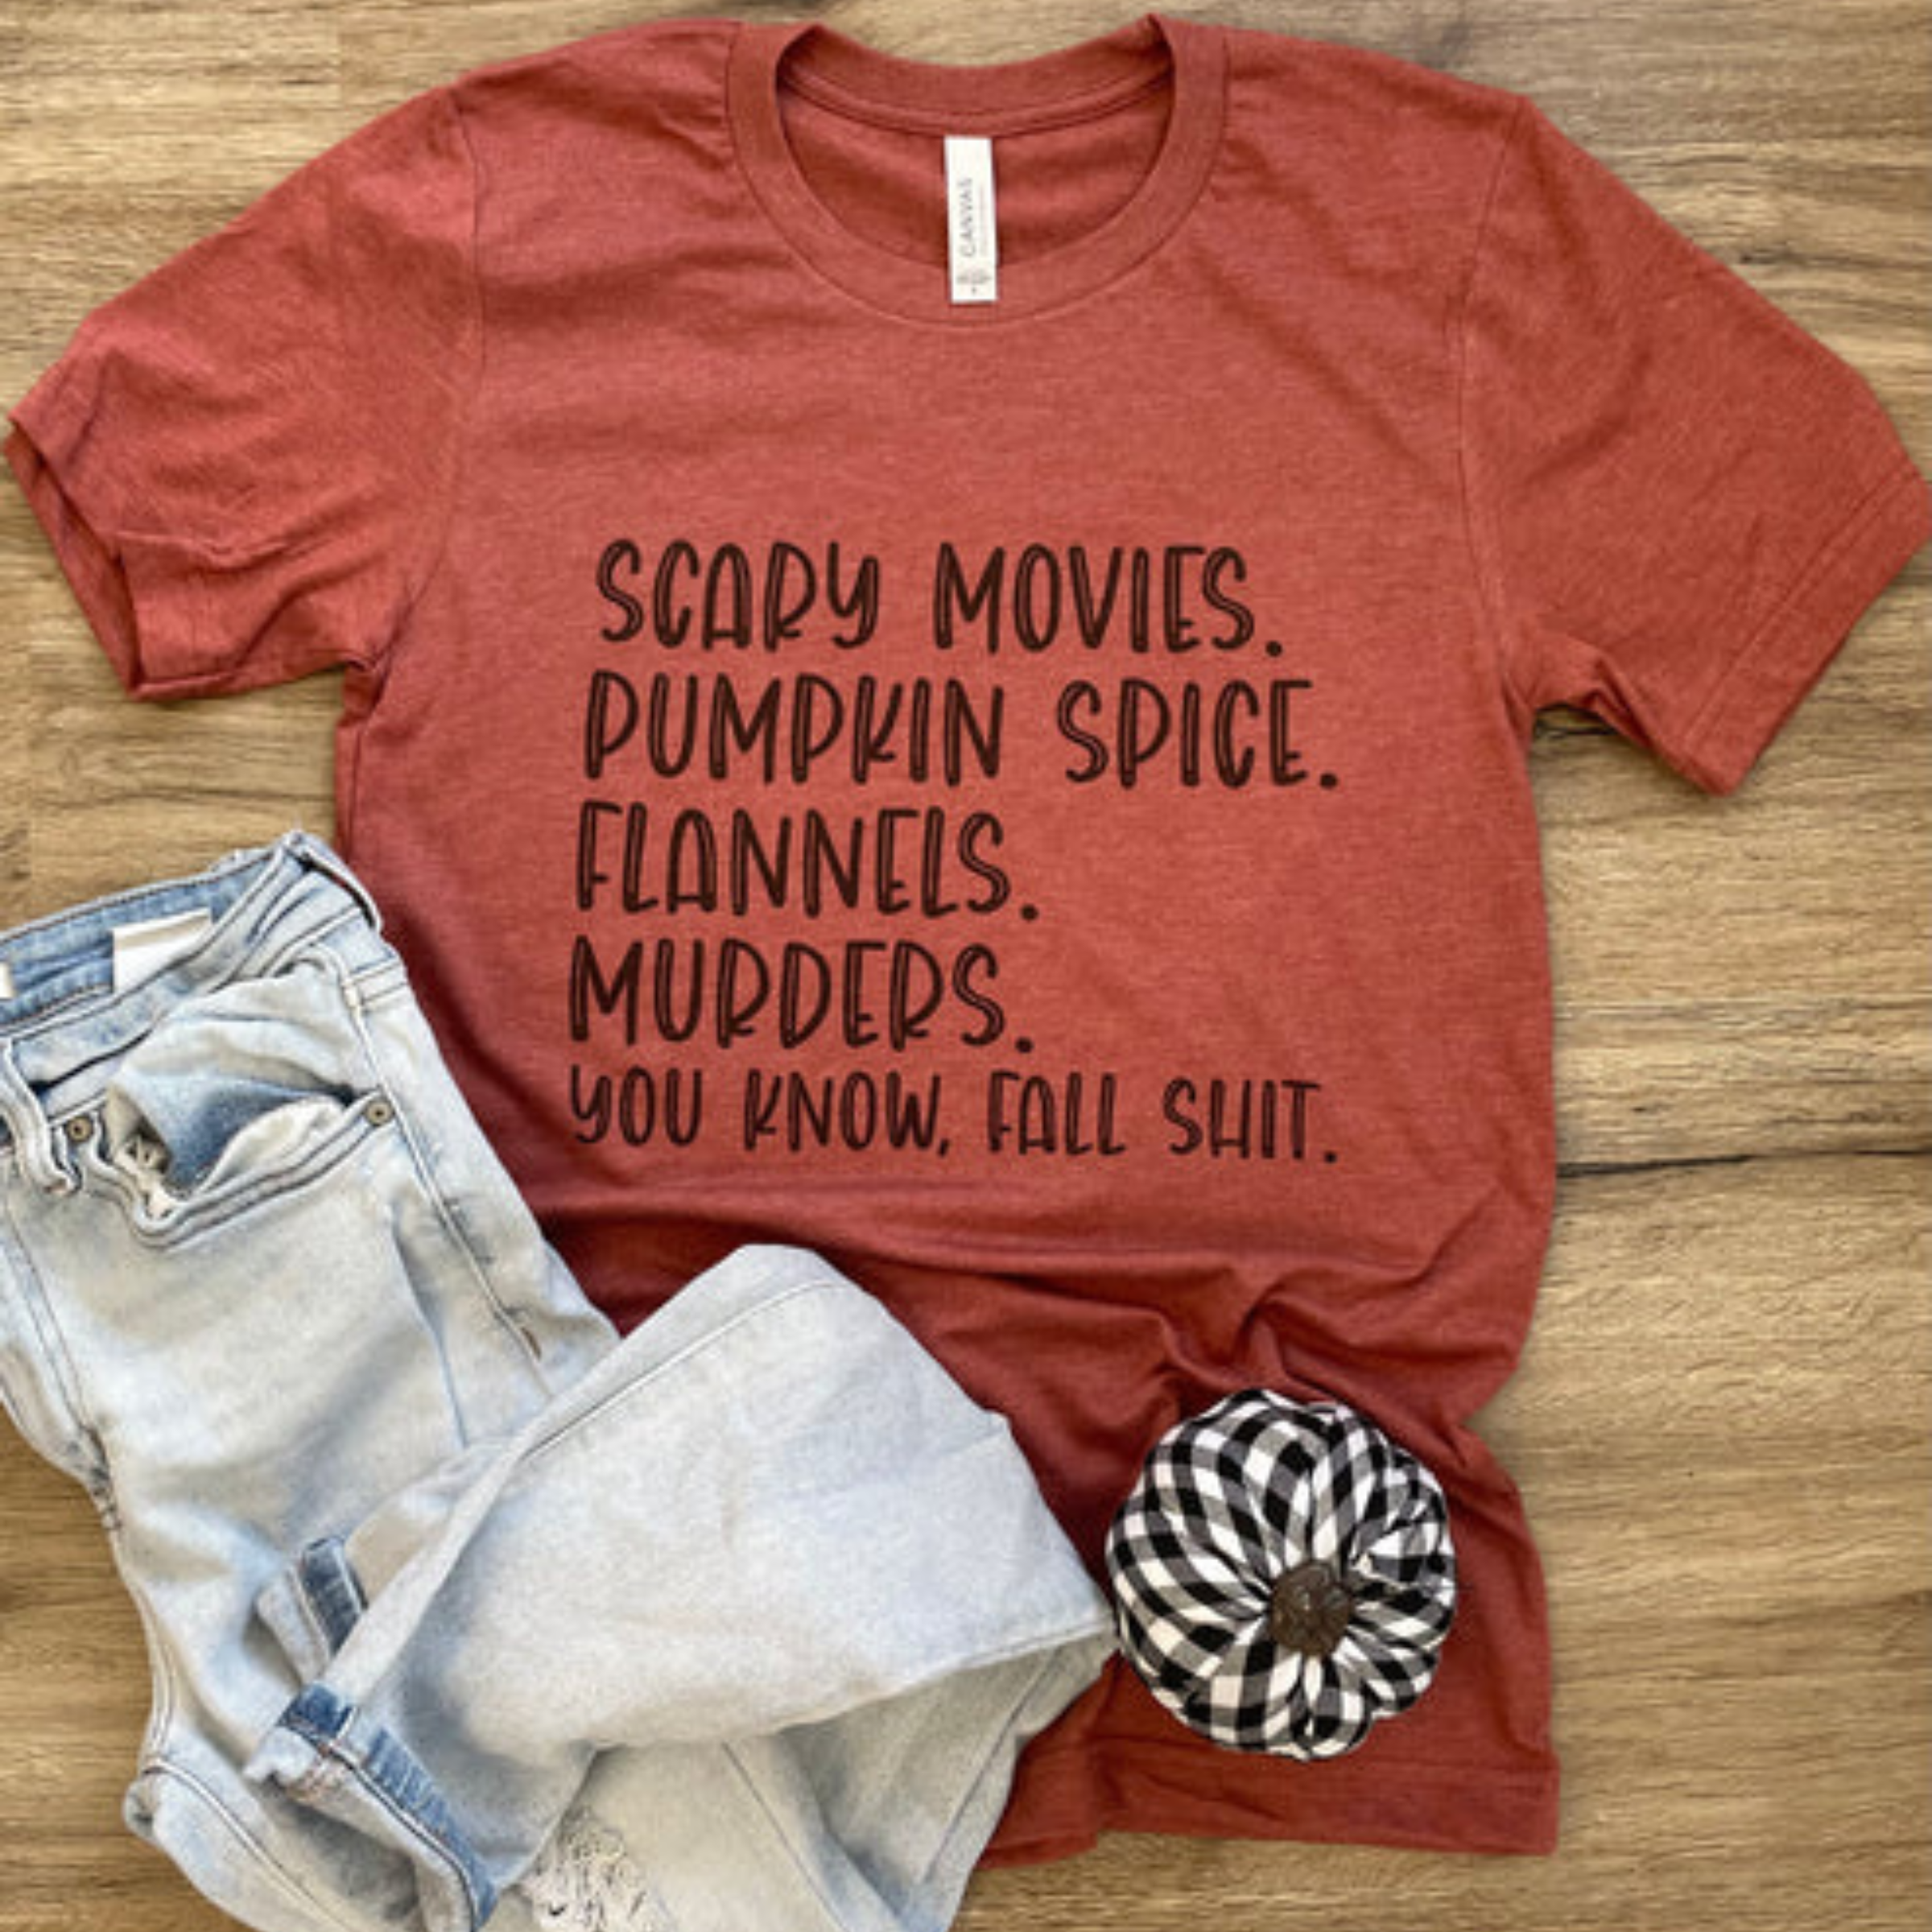 This heather rust red graphic tee says "Scary Movies. Pumpkin Spice. Flannels. Murders. You Know, Fall Shit." in a fun, black font stacked. This is a Bella + Canvas tee with short sleeves and a crew neckline. It is shown as a flat lay and paired with light, distressed denim jeans. 